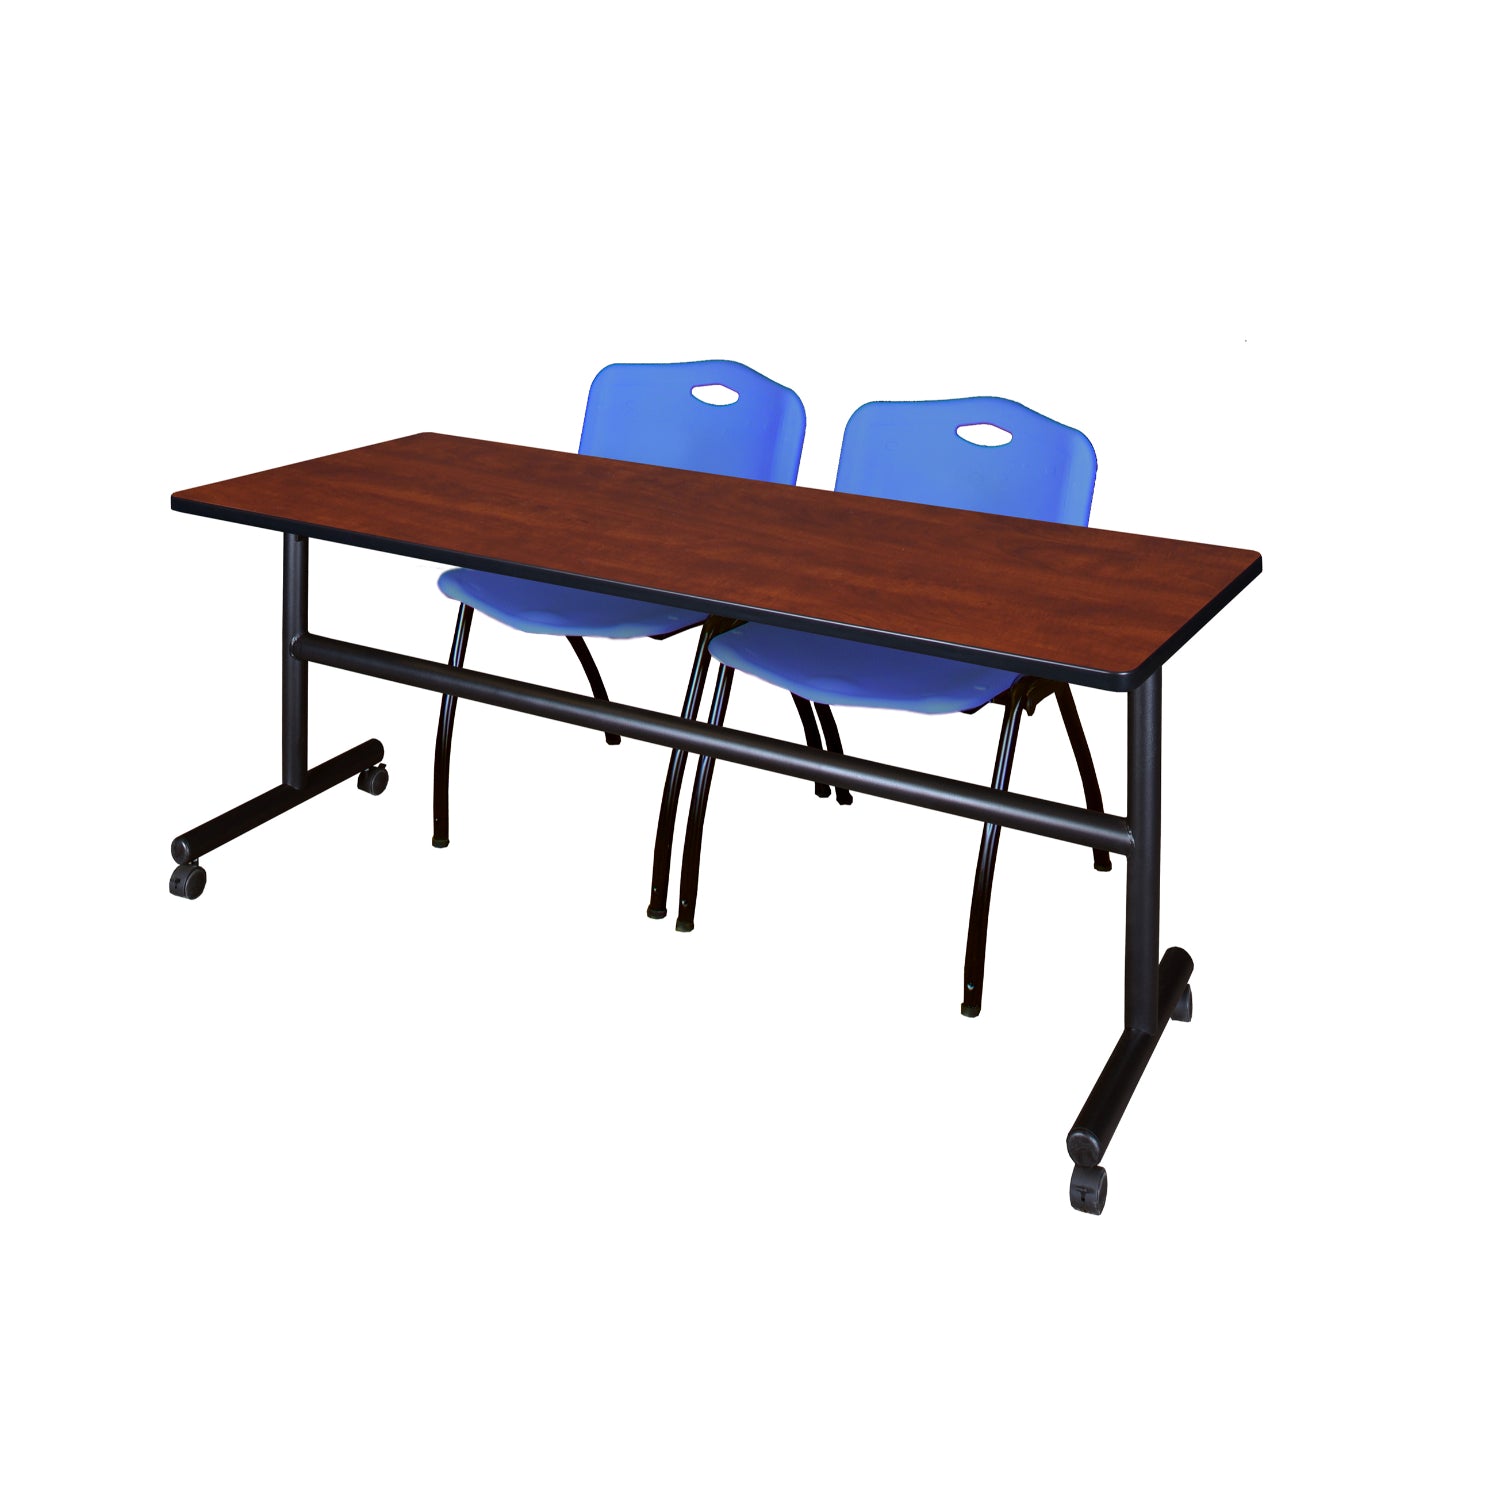 Kobe Flip Top Training Table and Chair Package, Kobe 72" x 30" Flip Top Mobile Nesting Table with 2 "M" Stack Chairs